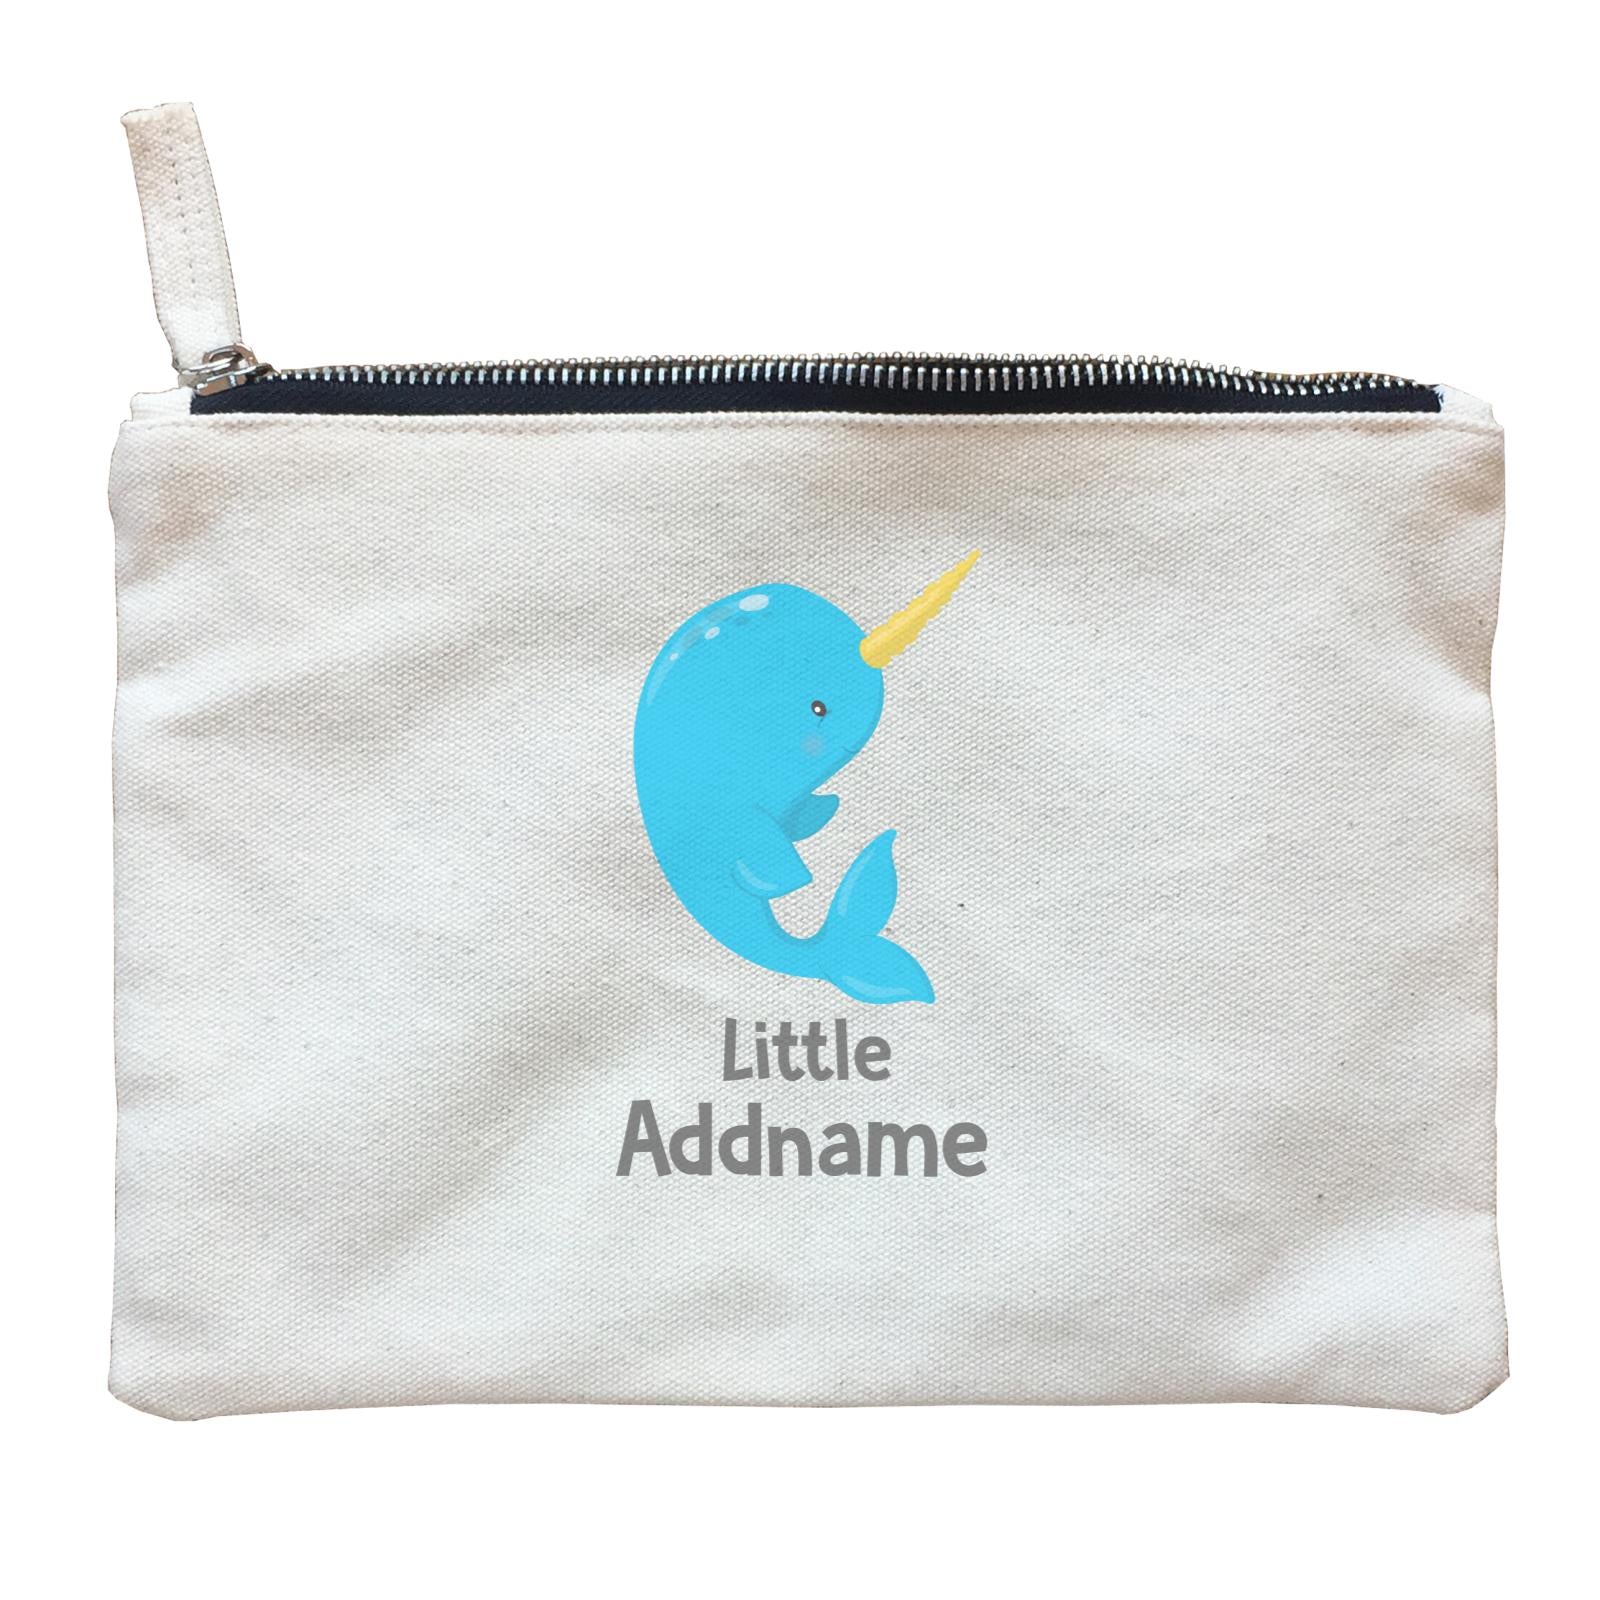 Arctic Animals Little Narwal Unicorn Whale Addname Zipper Pouch